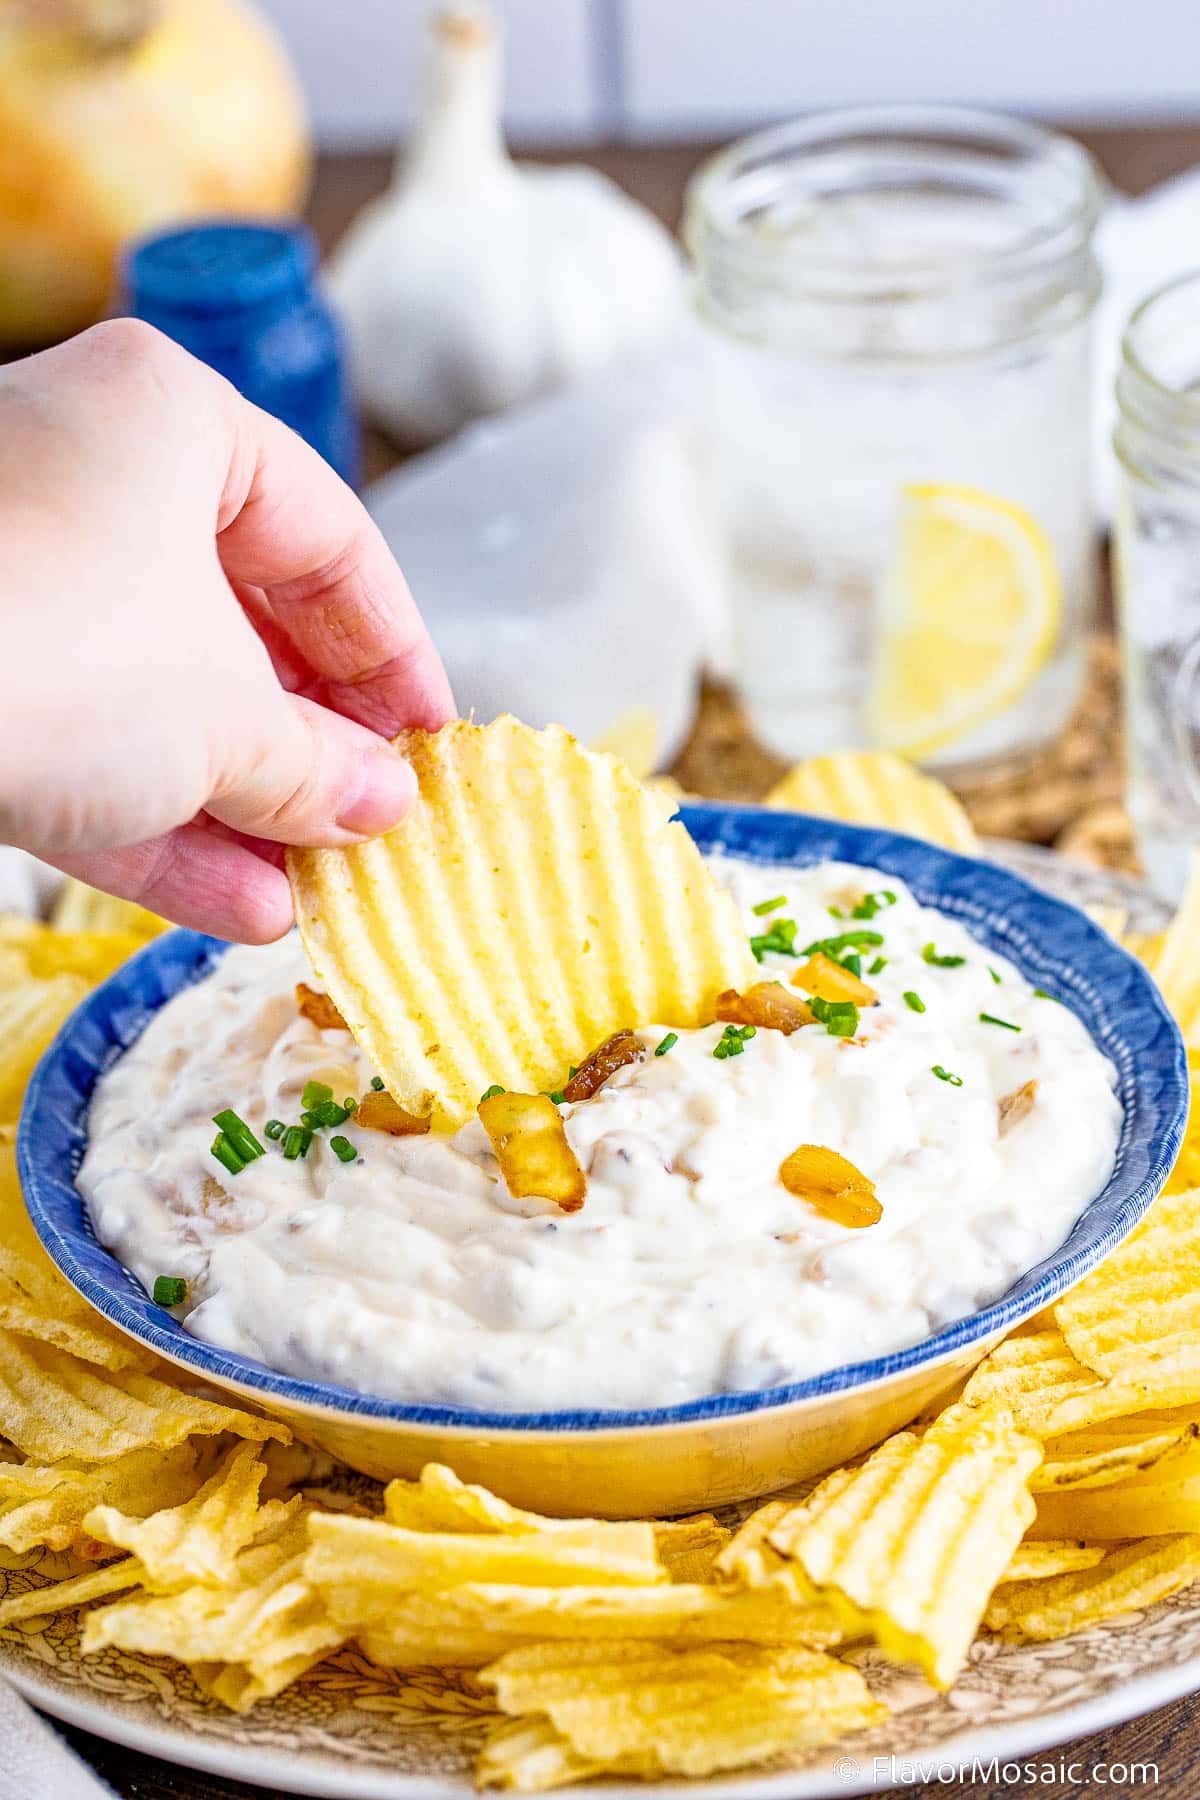 A wavy potato chip is being dipped into a creamy homemade French Onion Dip, with chives and caramelized onions.